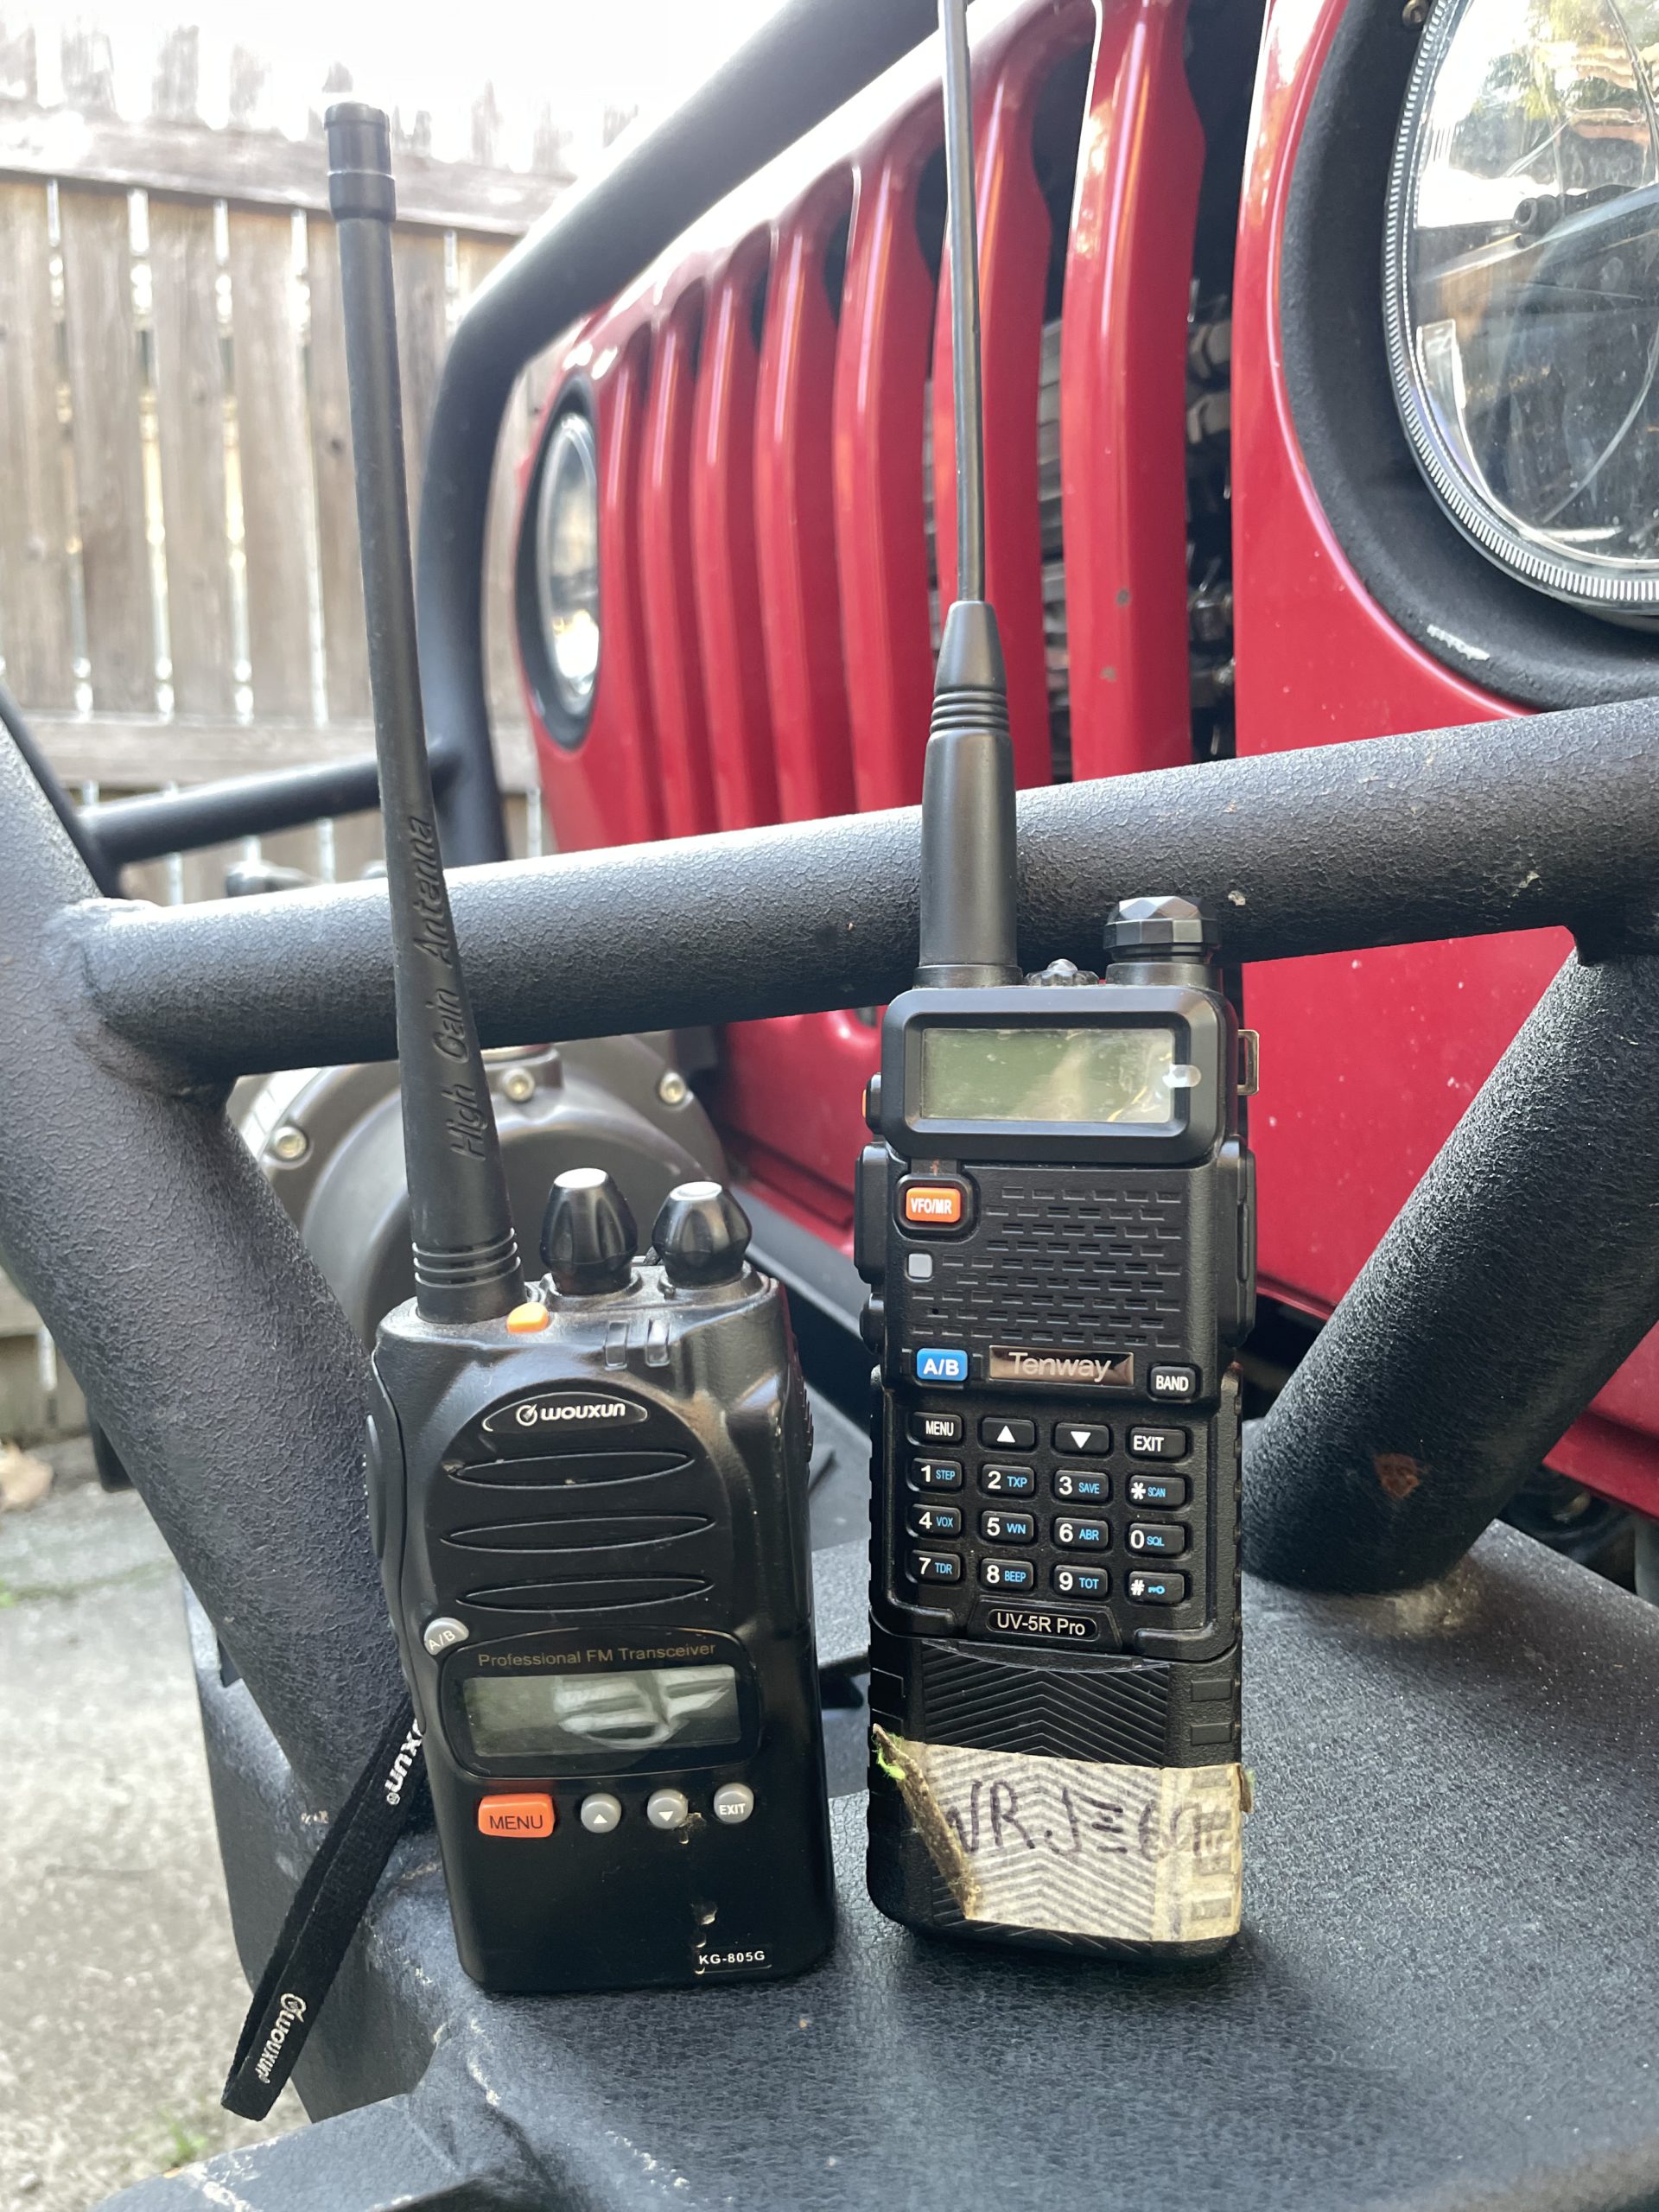 GMRS, What do I need to know